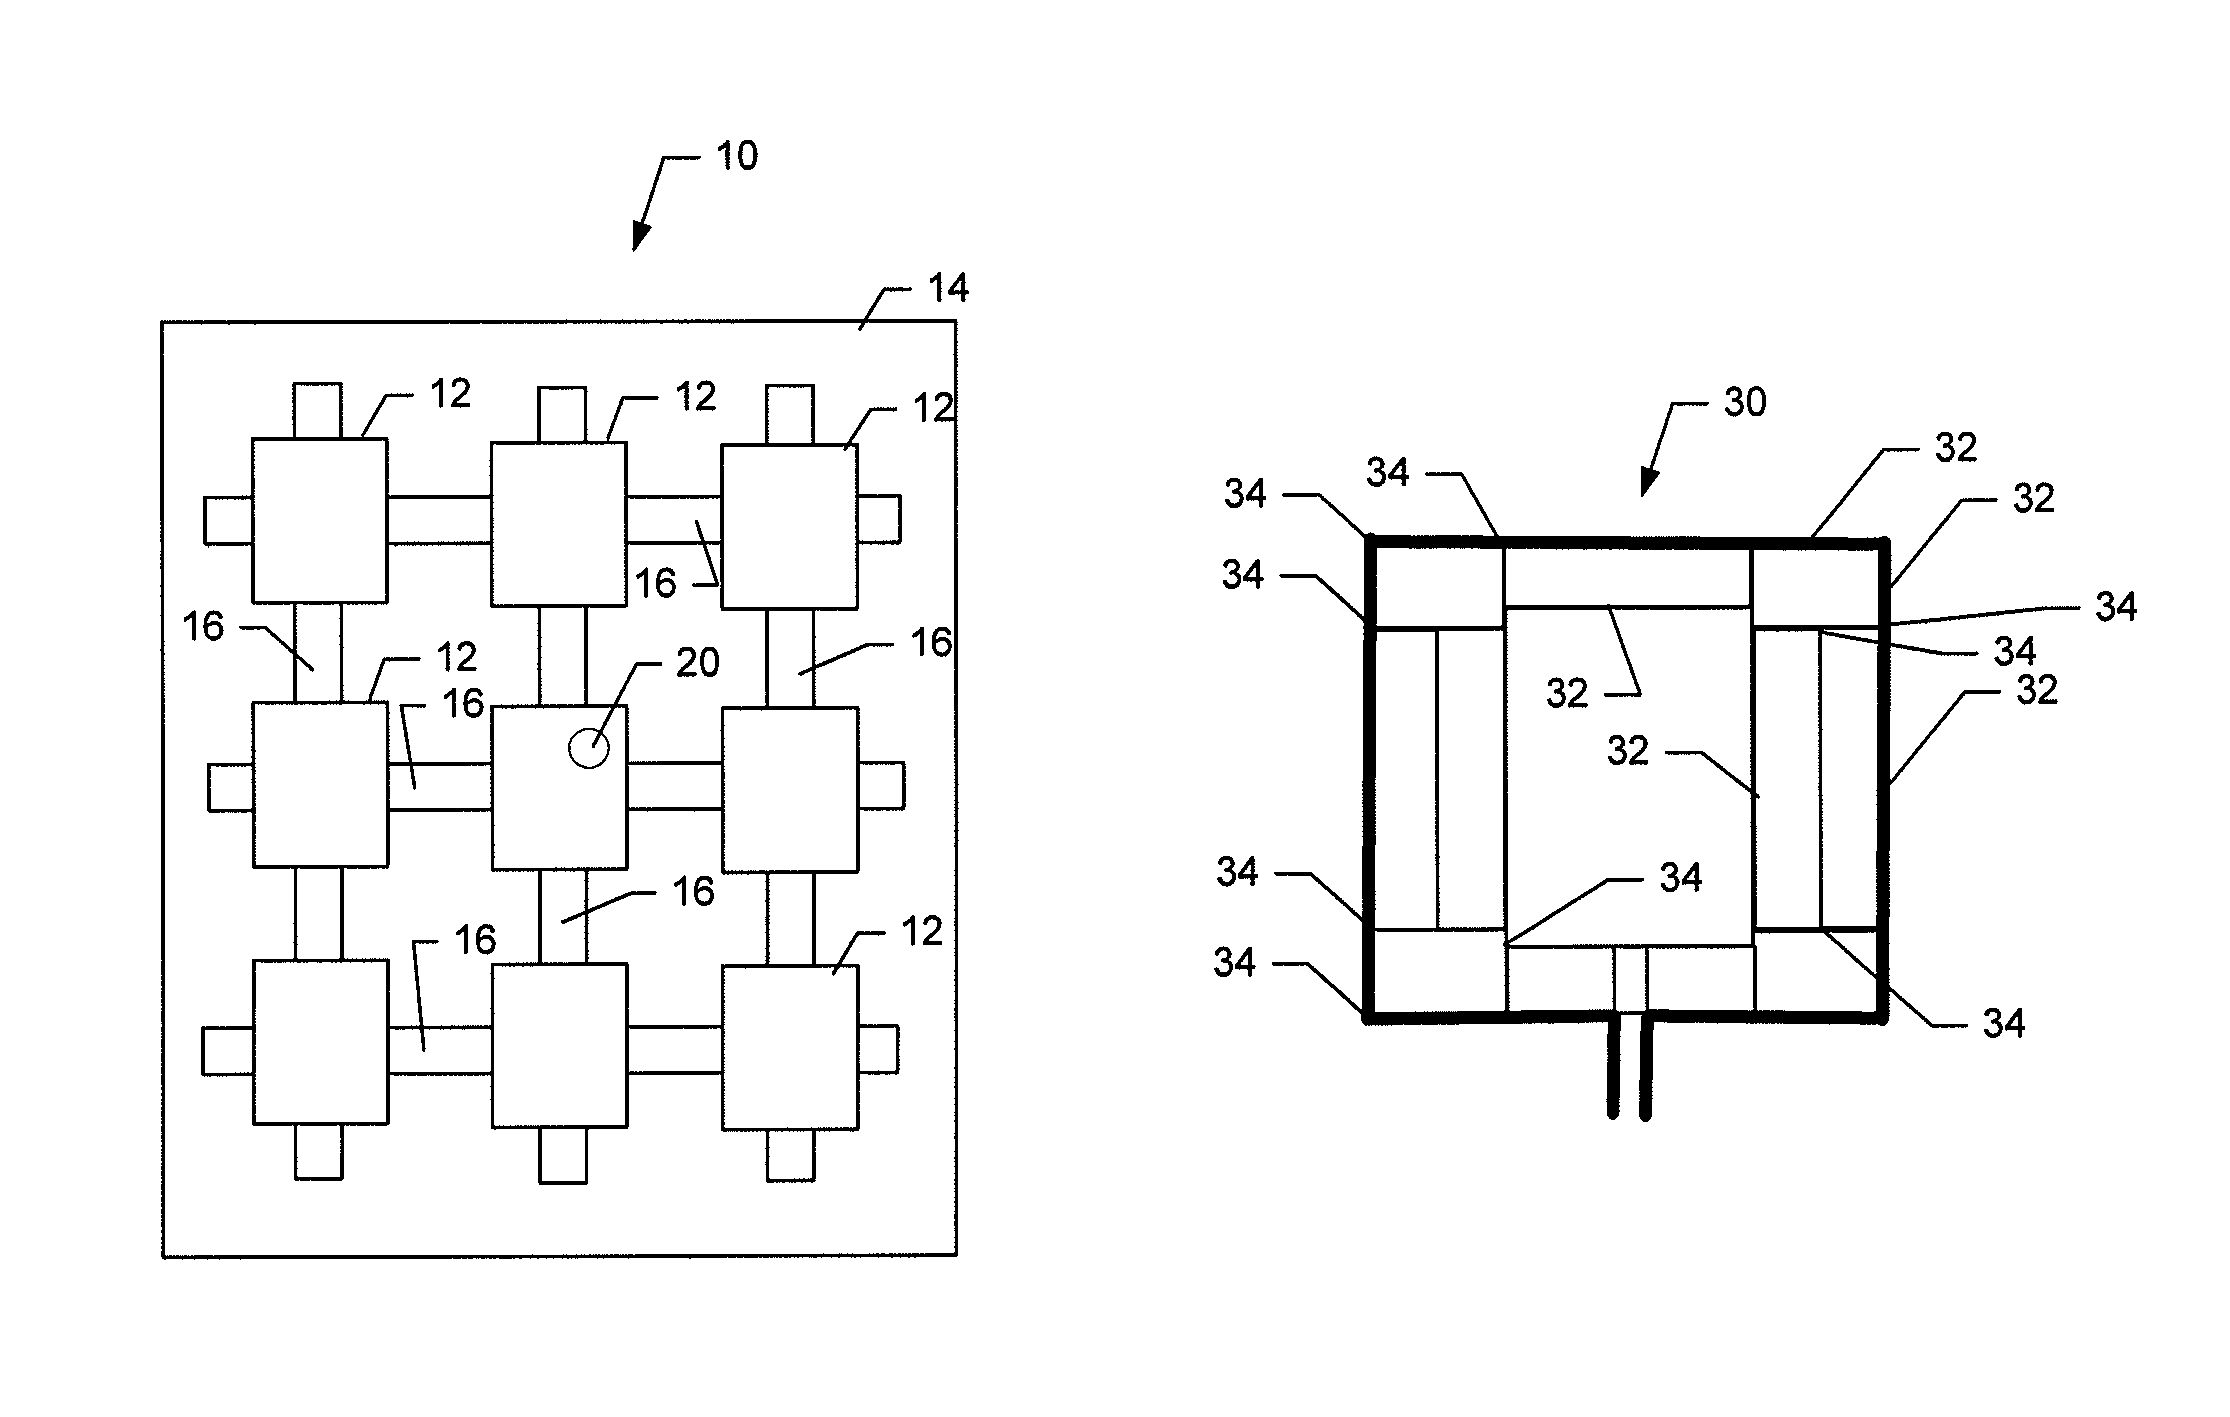 Apparatus and associated method for providing a frequency configurable antenna employing a photonic crystal